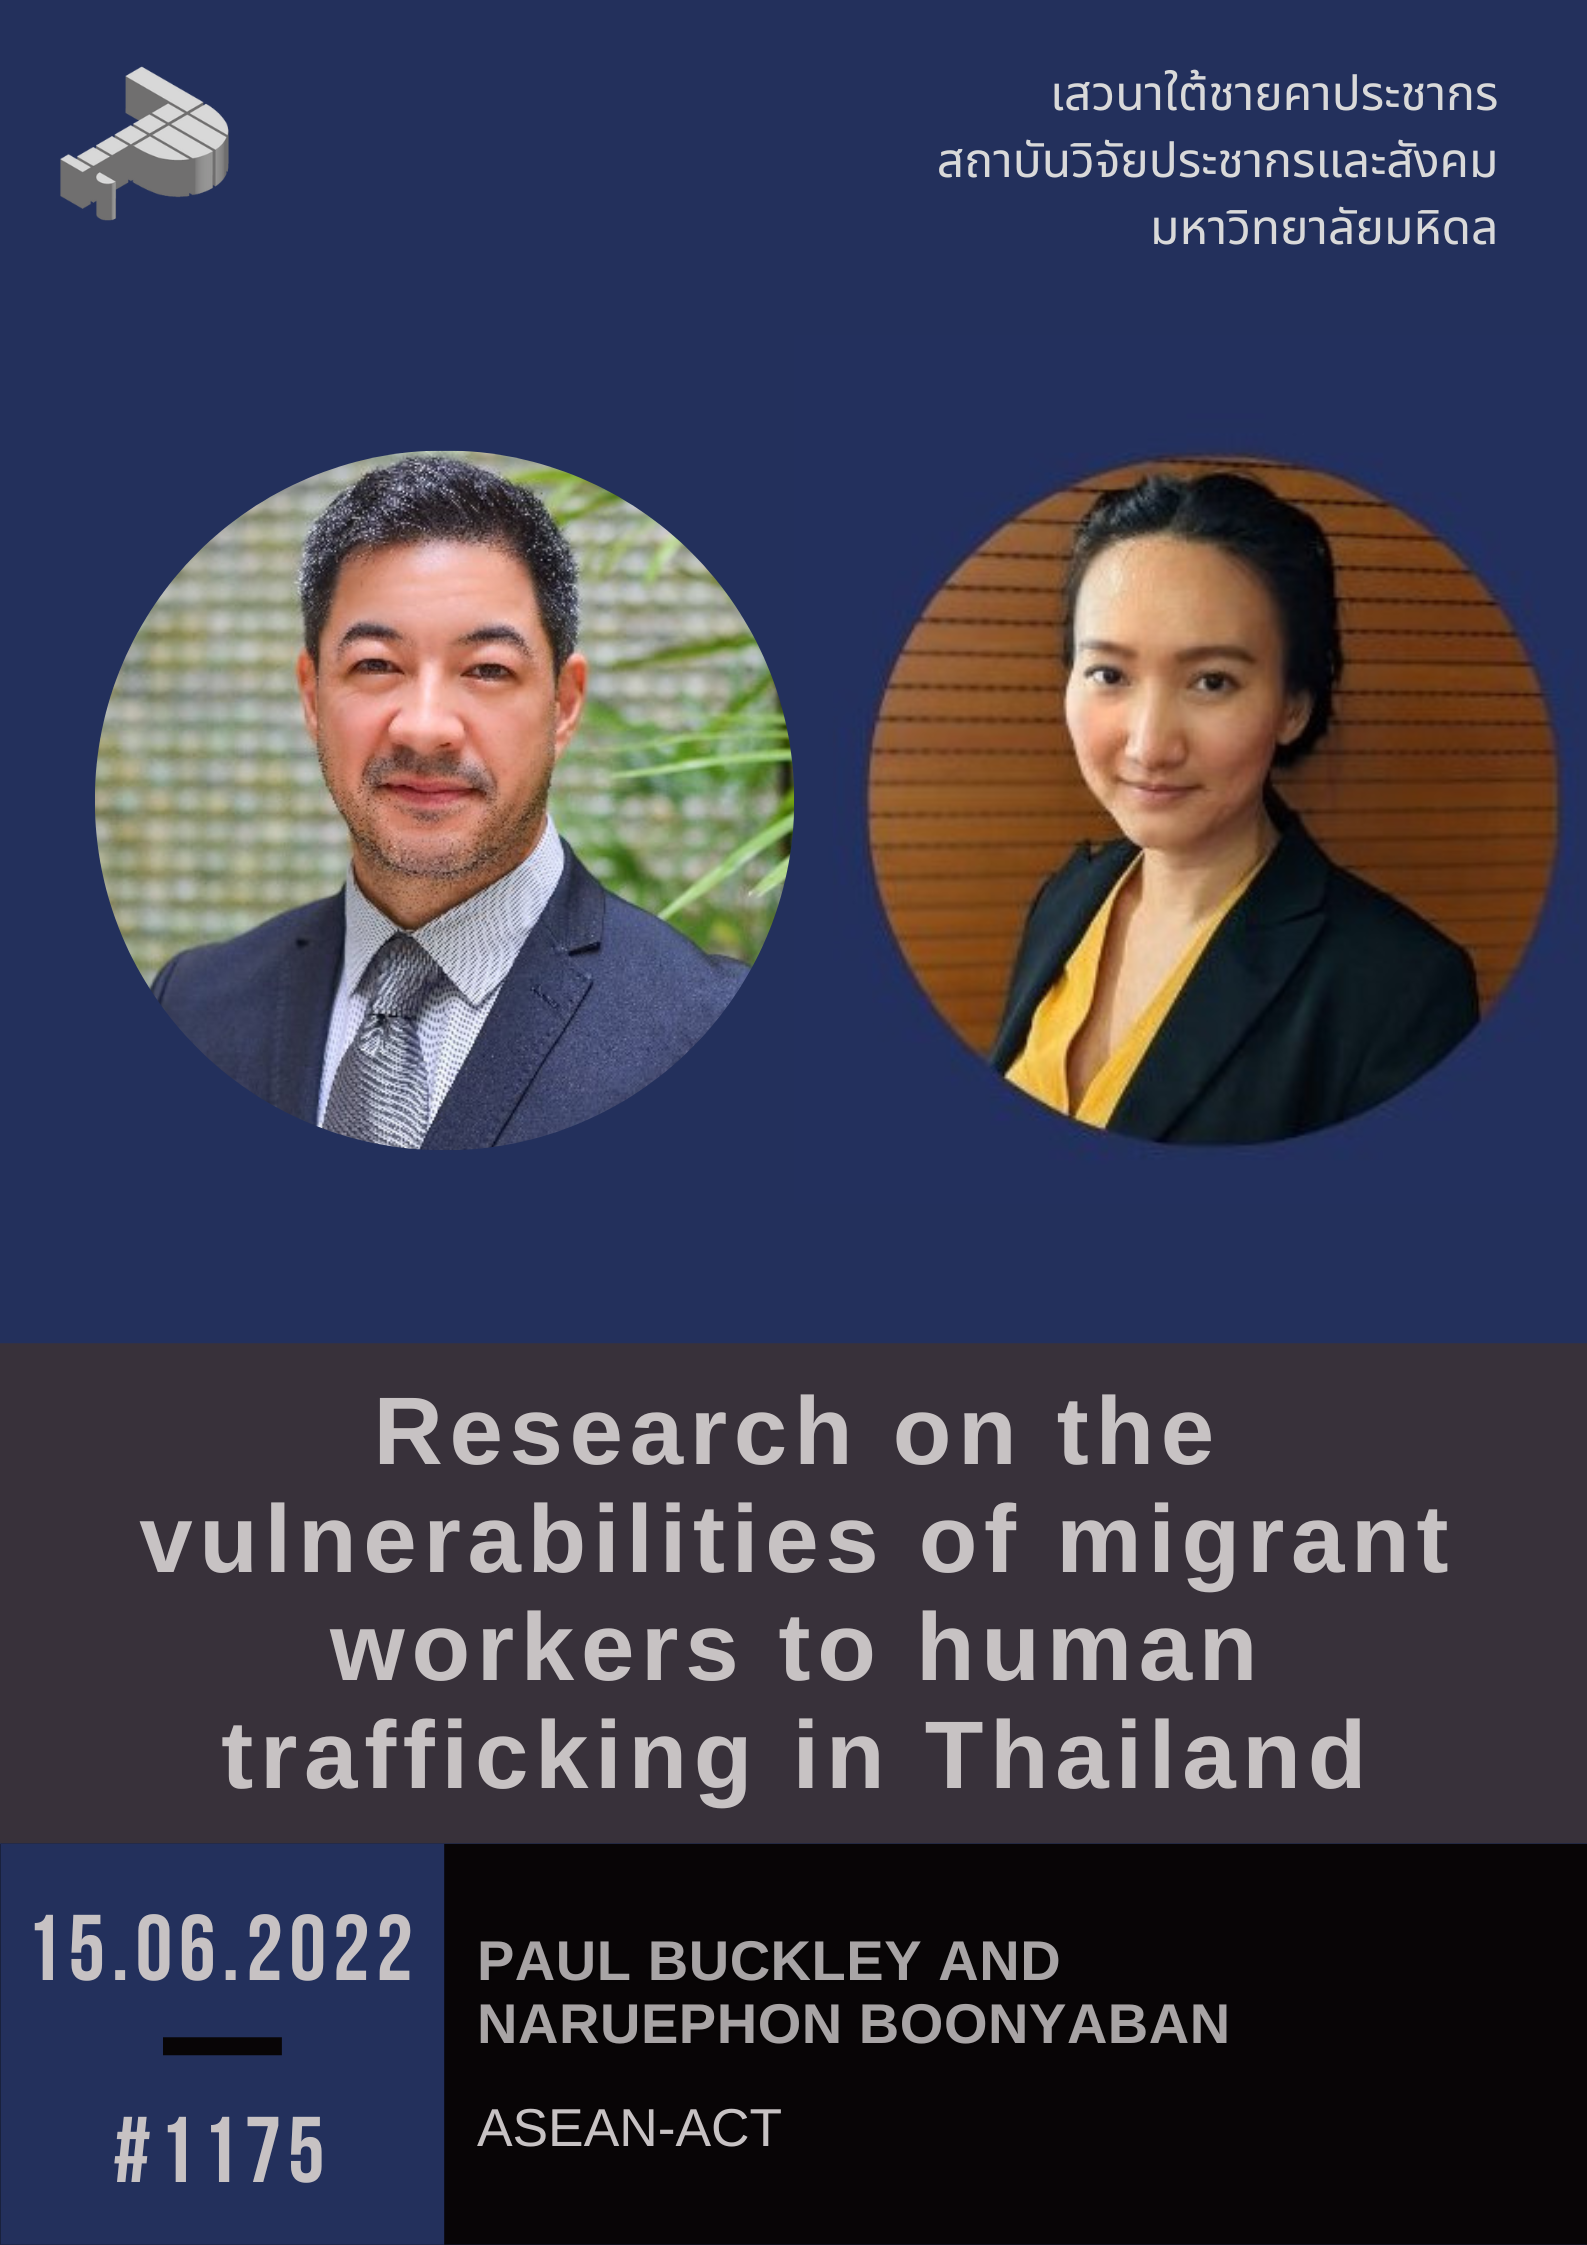 Research on the vulnerabilities of migrant workers to human trafficking in Thailand